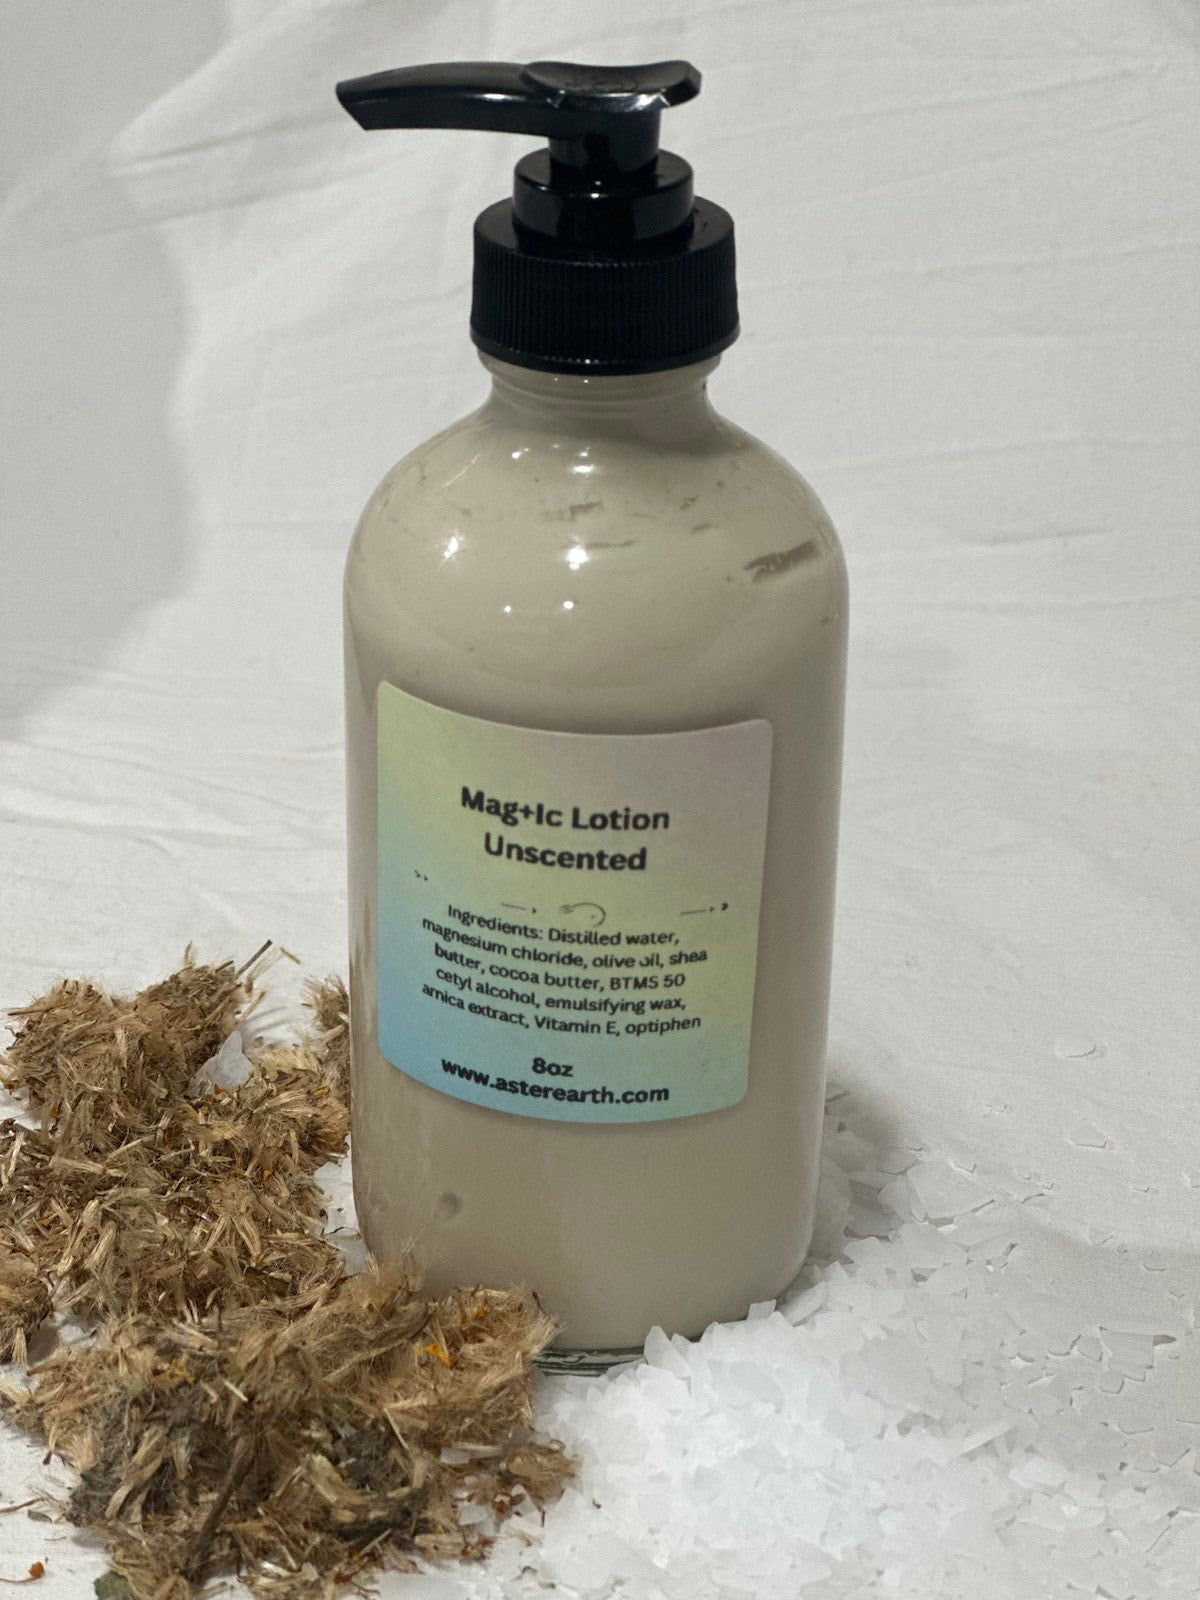 MAG+IC Lotion (Unscented)